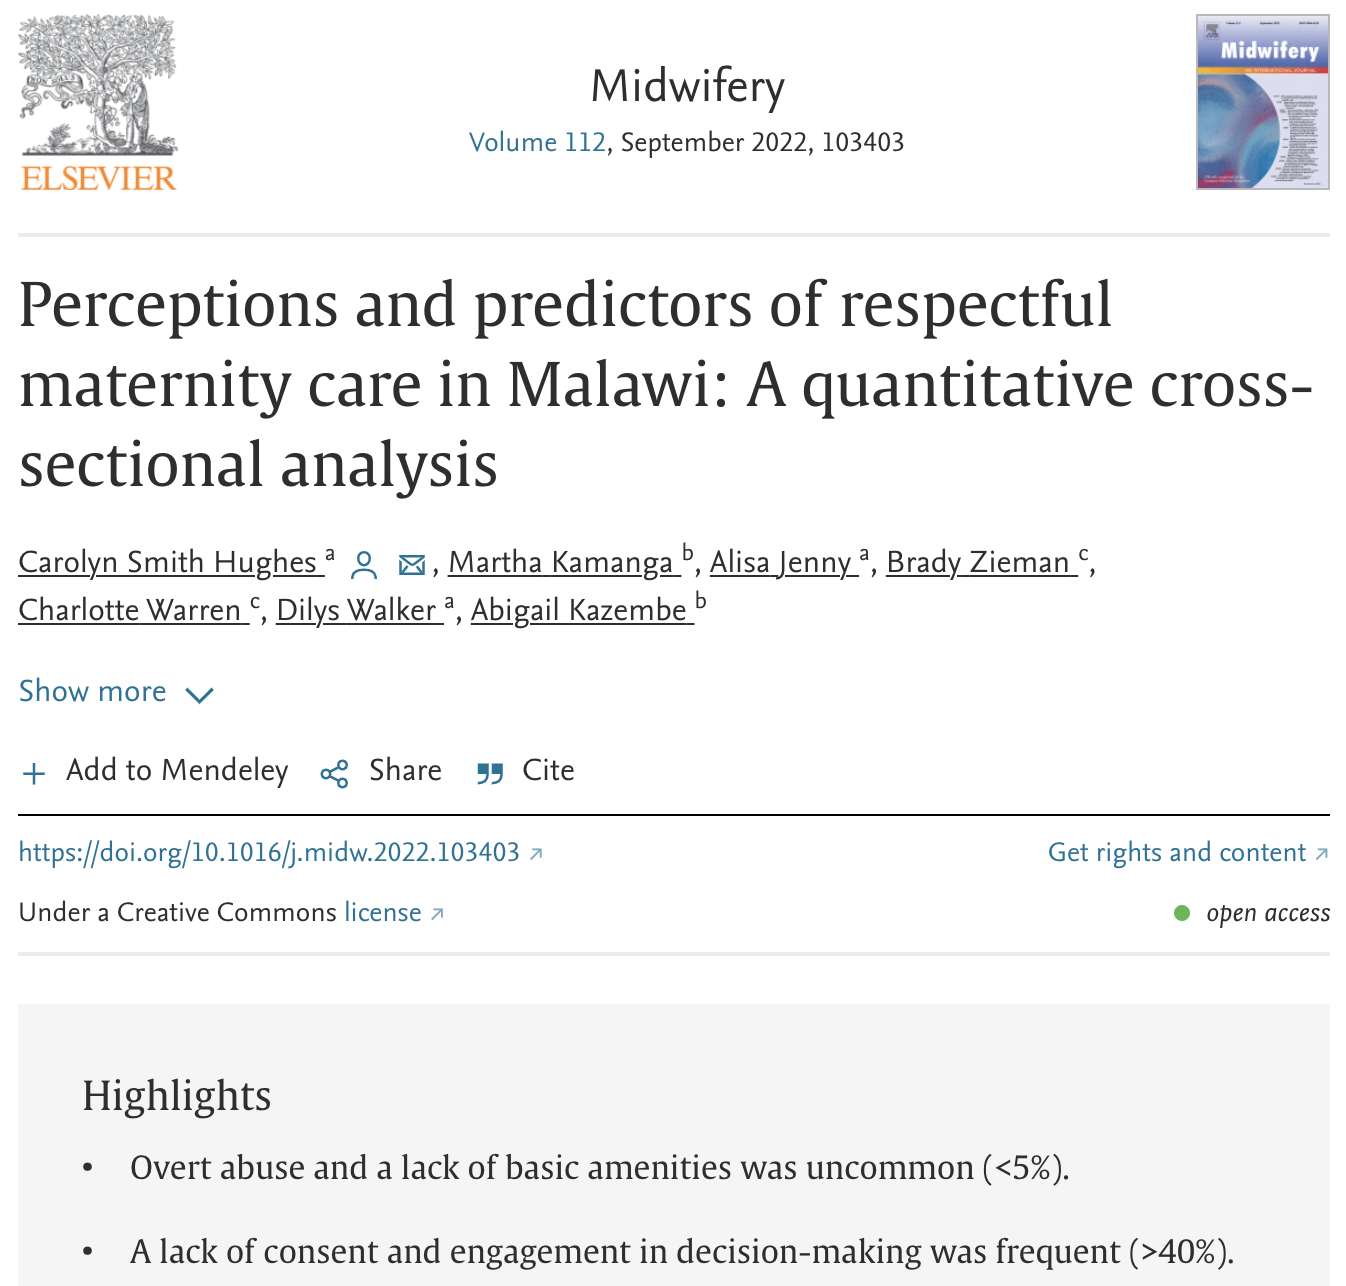 Perceptions and predictors of respectful maternity care in Malawi: A quantitative cross-sectional analysis.